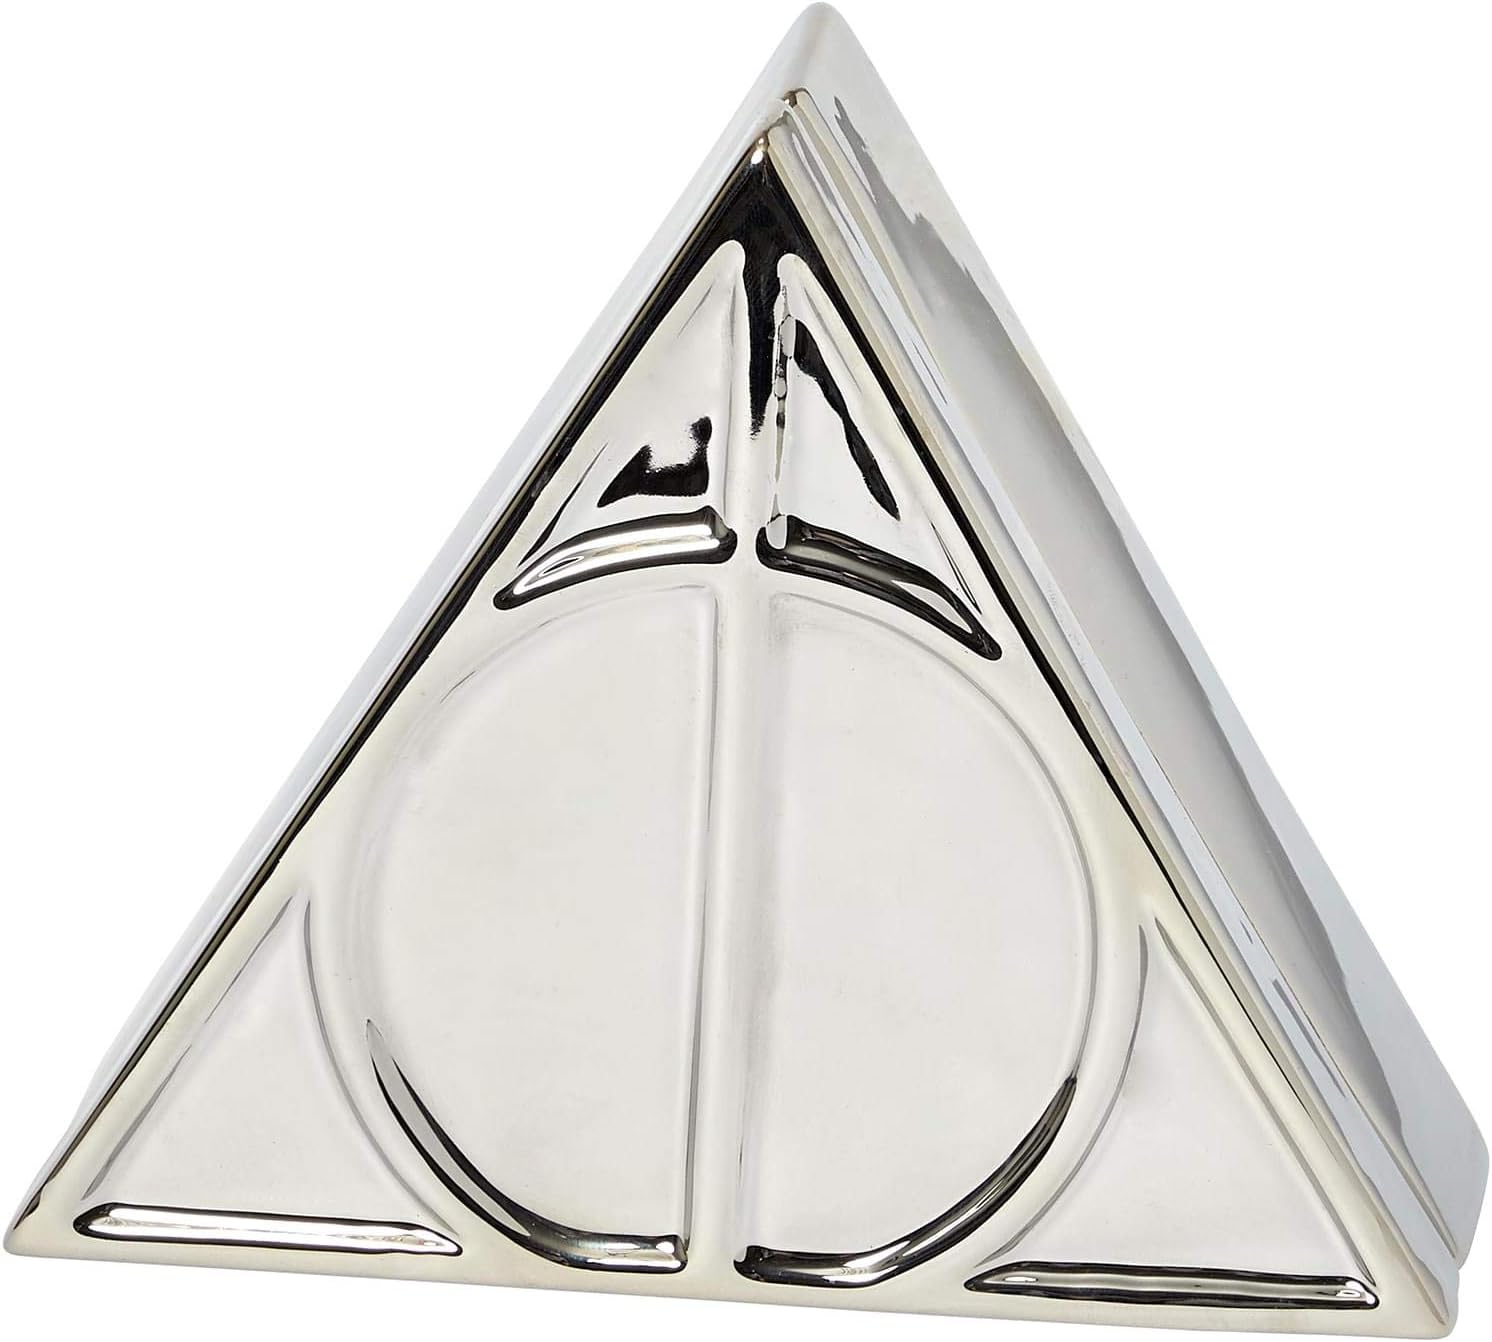 Harry Potter Deathly Hallows Silver Trinket Box - Ceramic Deathly Hallows Symbol Design with Lid - Great Gift for Any Fan - 12 oz